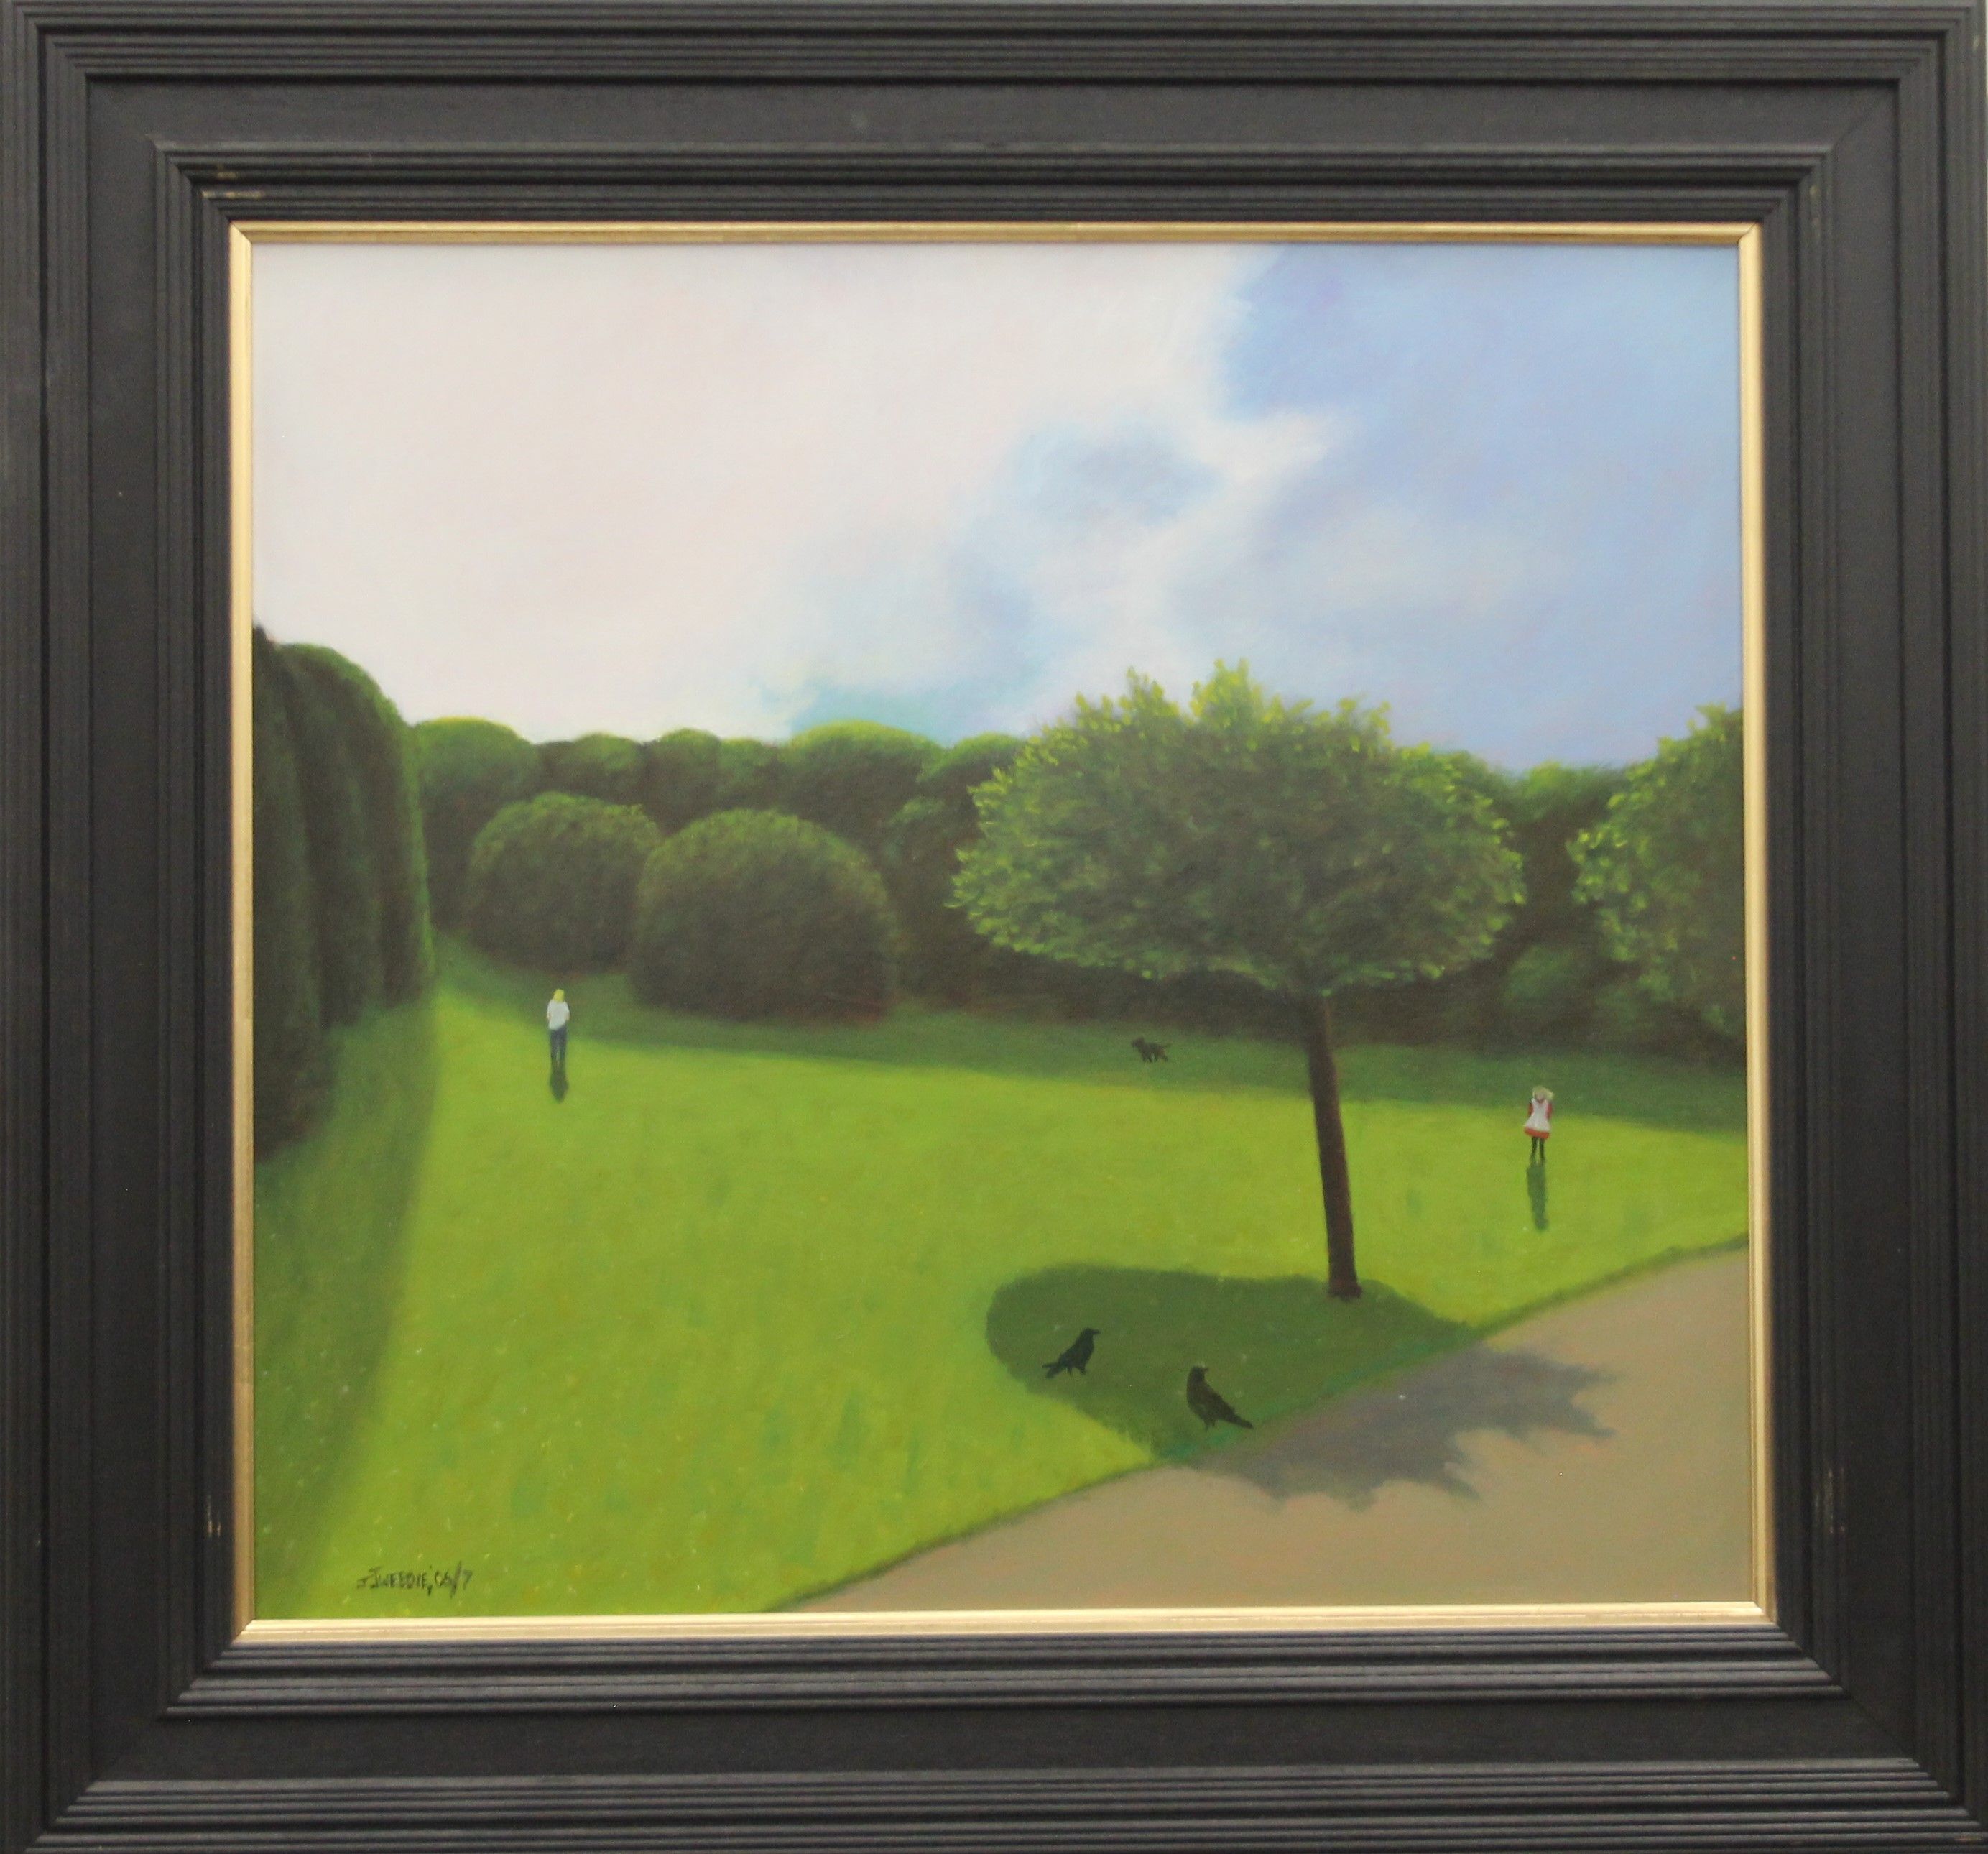 JAMES TWEEDIE (AR), Dream, oil on board, signed and dated 06/07, framed. 61 x 56 cm. - Image 2 of 3